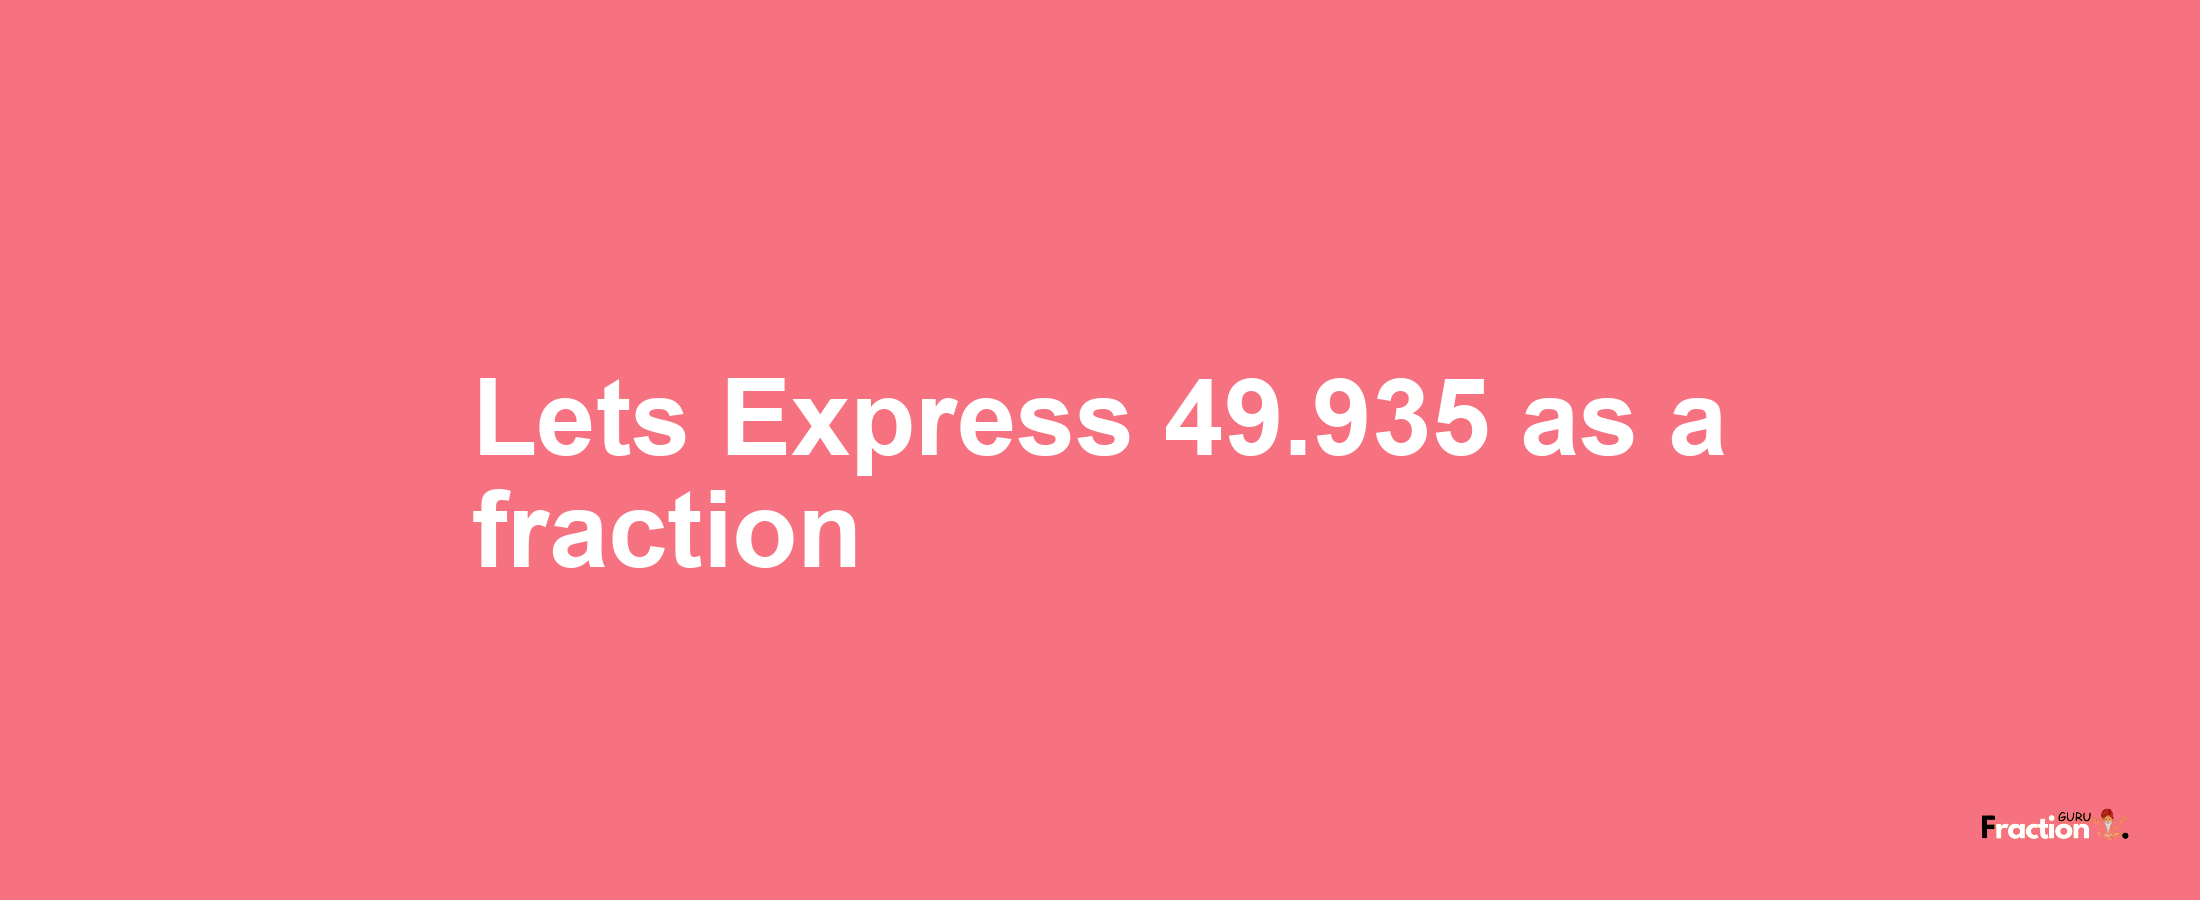 Lets Express 49.935 as afraction